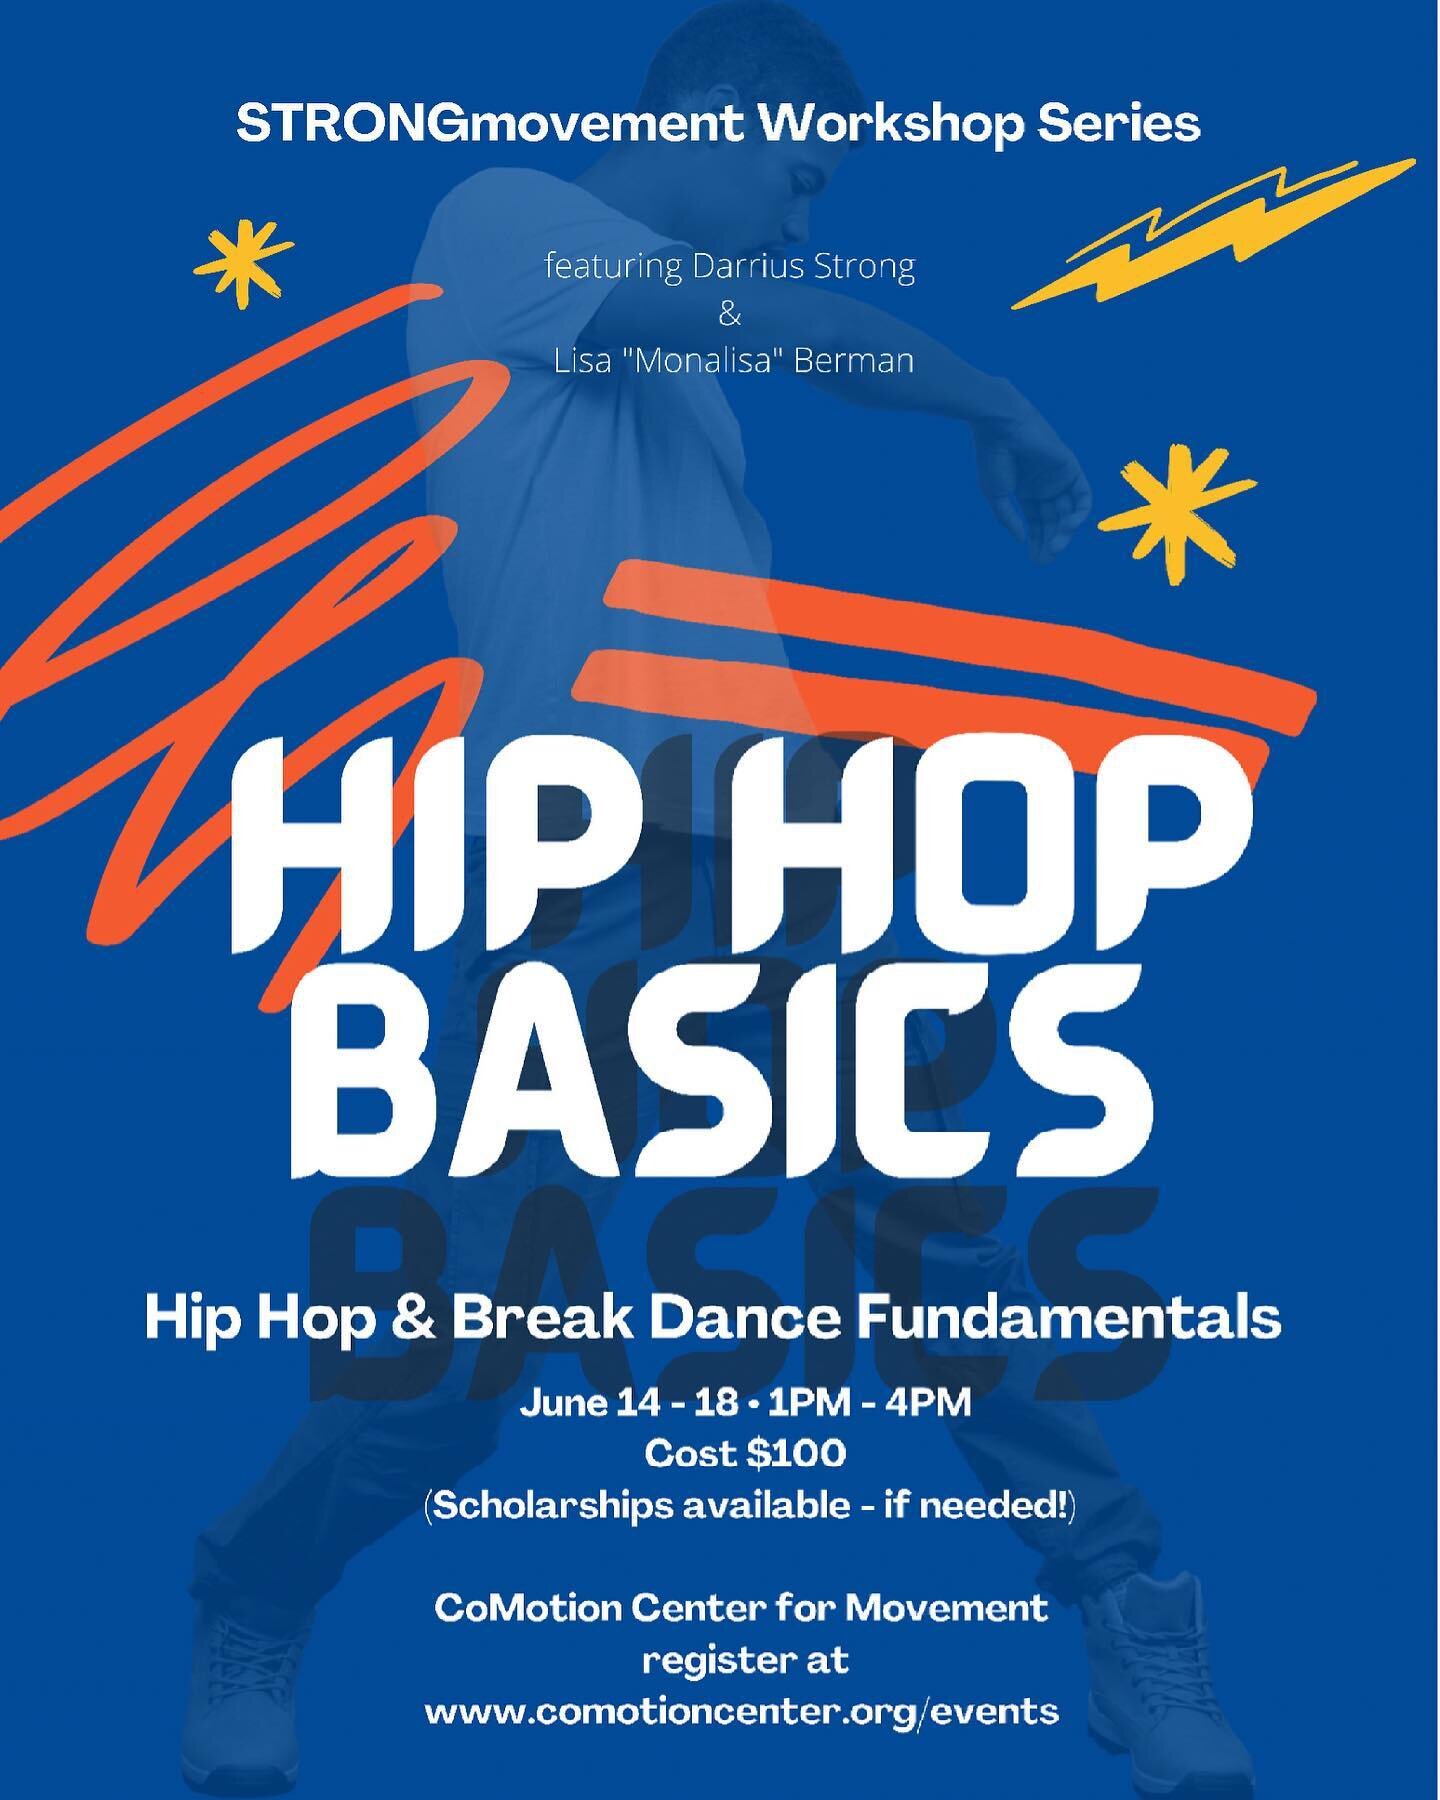 If you&rsquo;re ever been interested in learning the basics of hip hop, CoMotion is hosting a workshop led by Darrius Strong &amp; Lisa &ldquo;Monalisa&rdquo; Berman! Register for this 4 day Hip Hop &amp; Break Dance fundamentals workshop at comotion